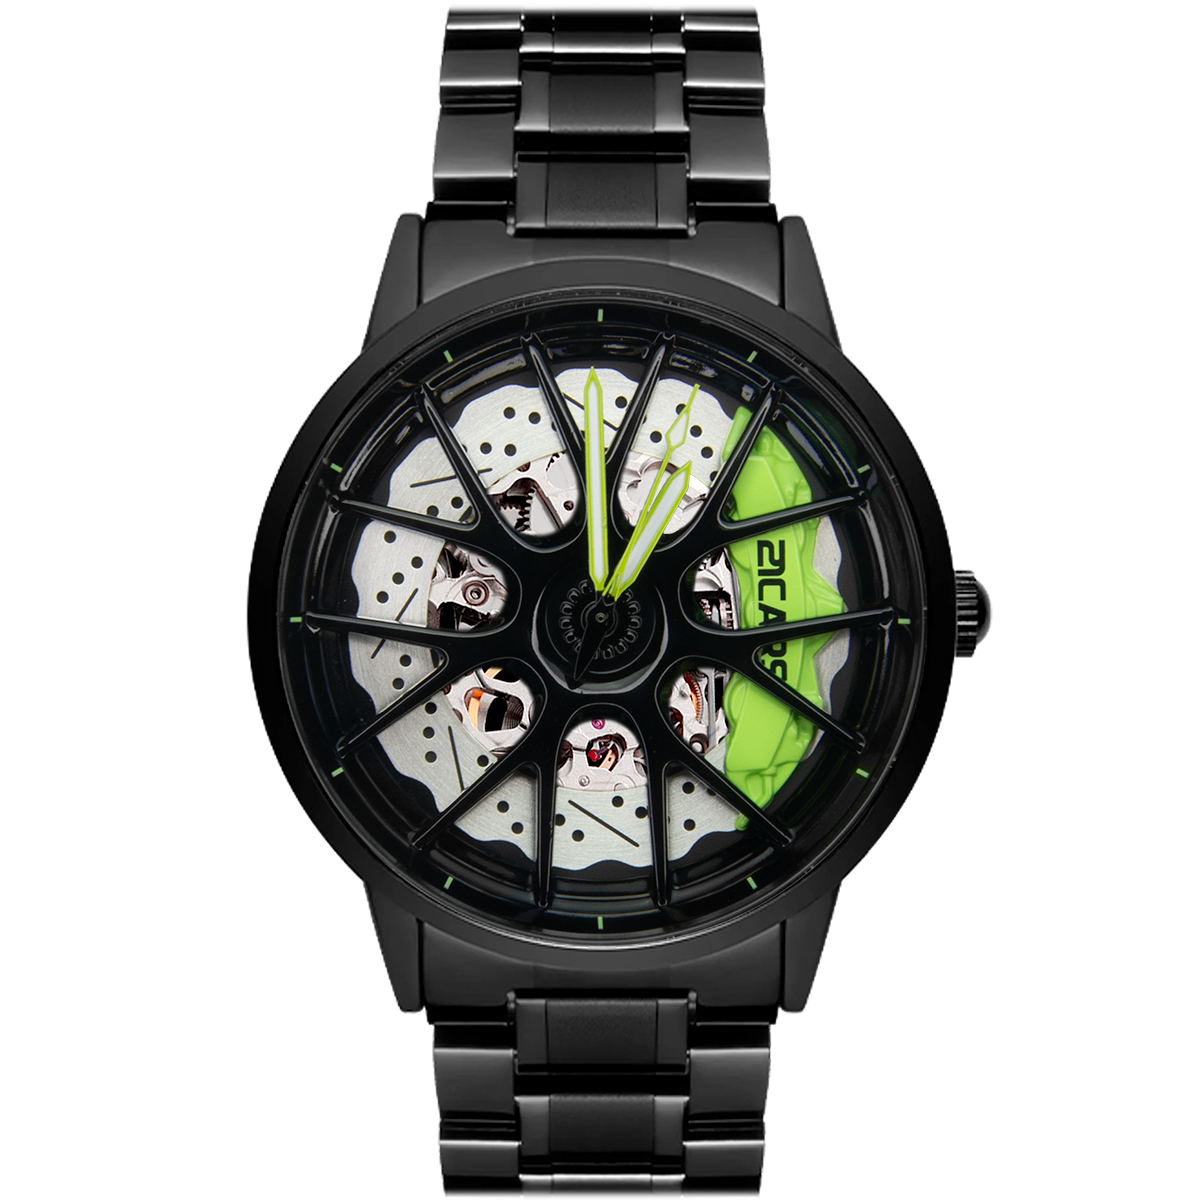 Trackmaster GT3 - Green - Black | Automatic